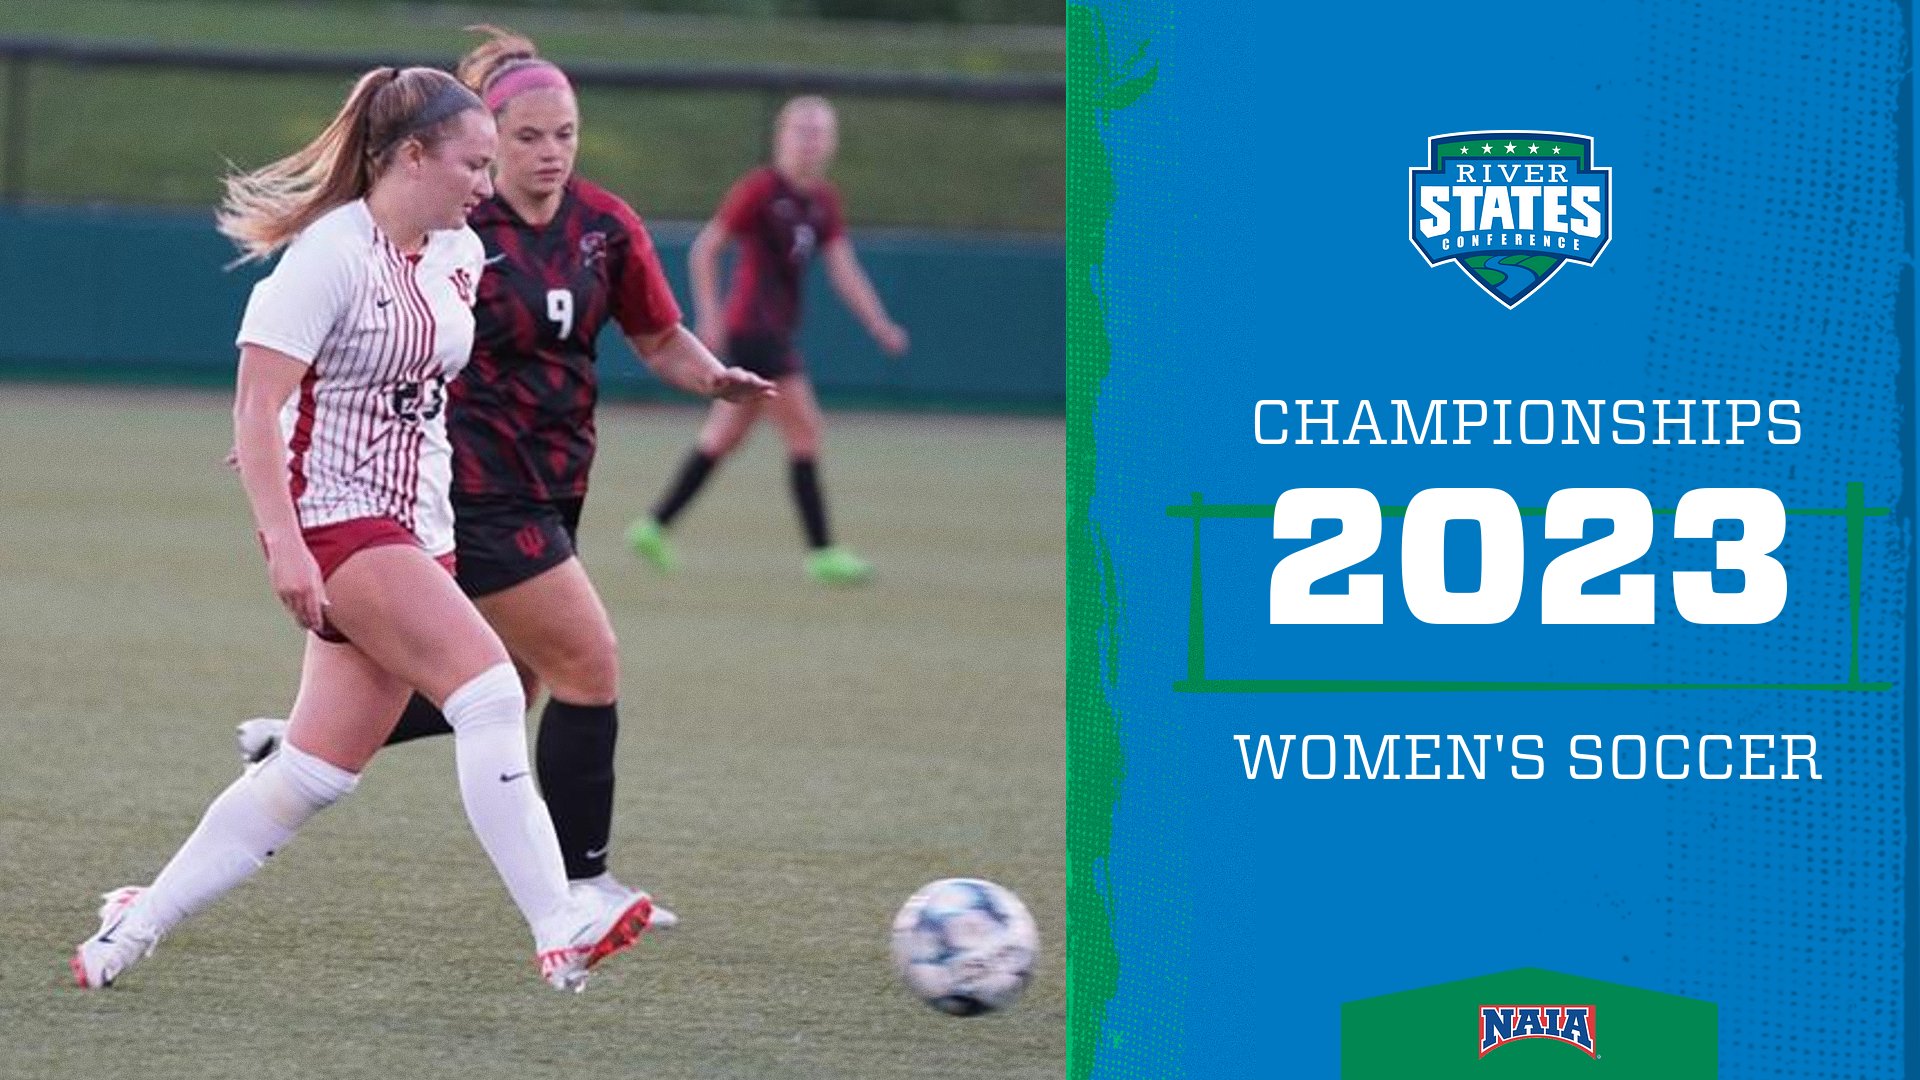 RSC Women's Soccer Championship Central: Schedule, Bracket, Links to Live Coverage